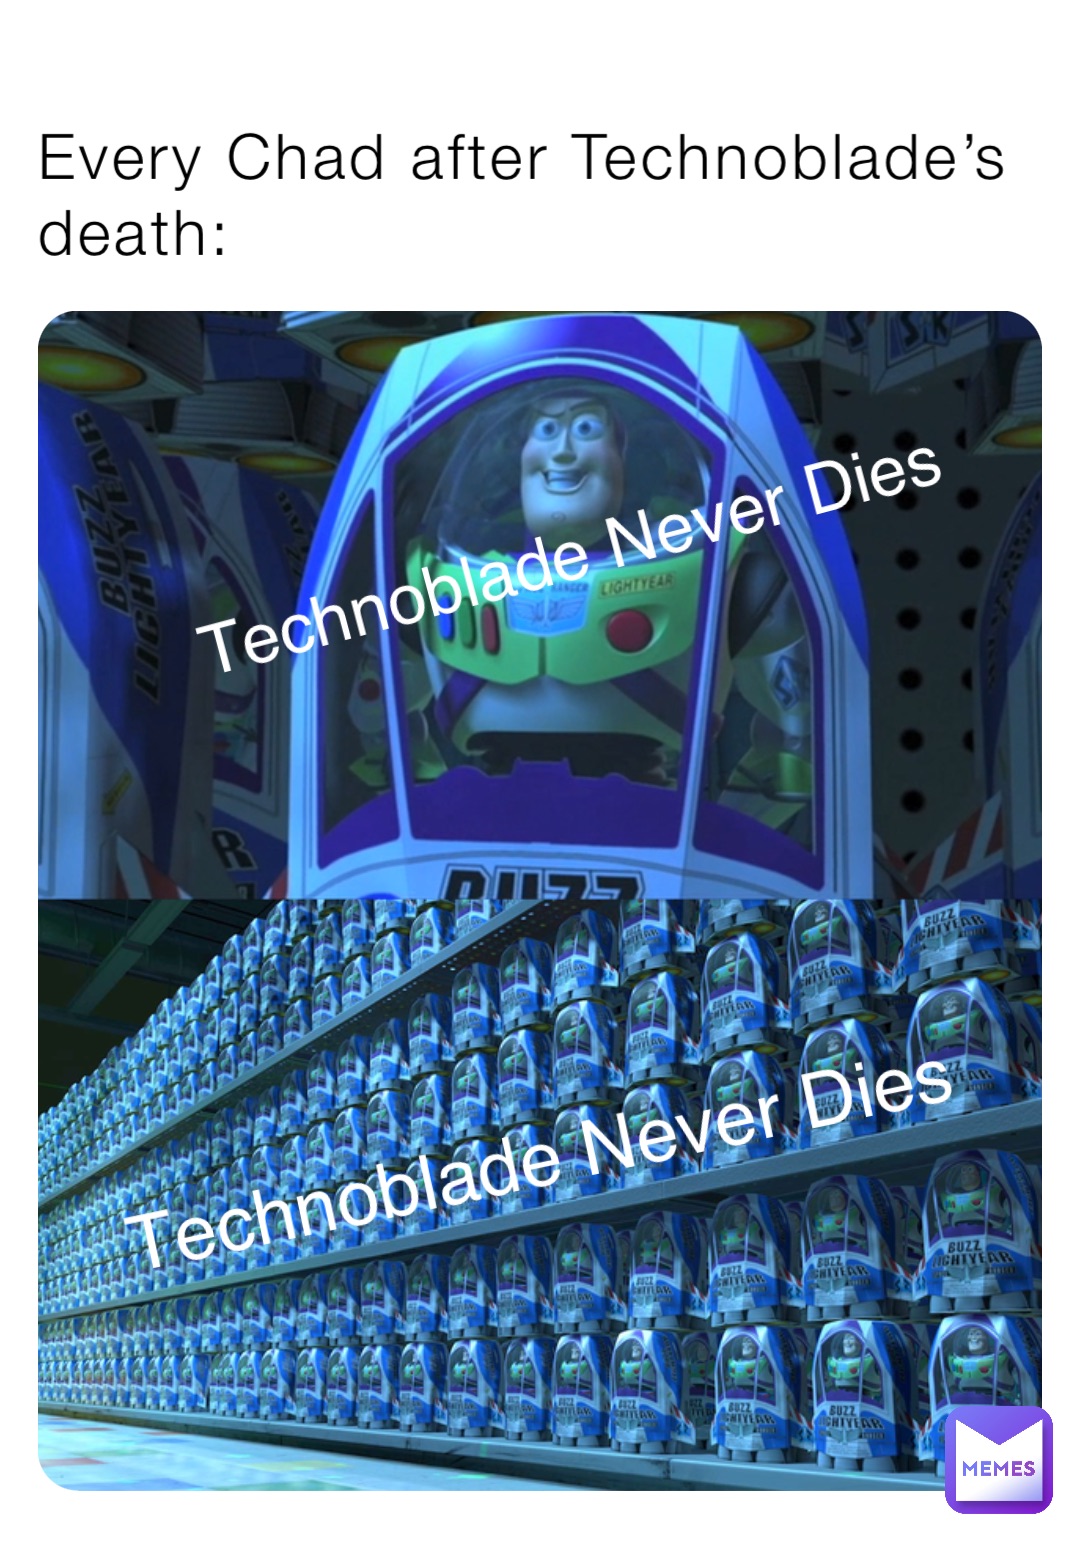 Every Chad after Technoblade’s death: Technoblade Never Dies Technoblade Never Dies